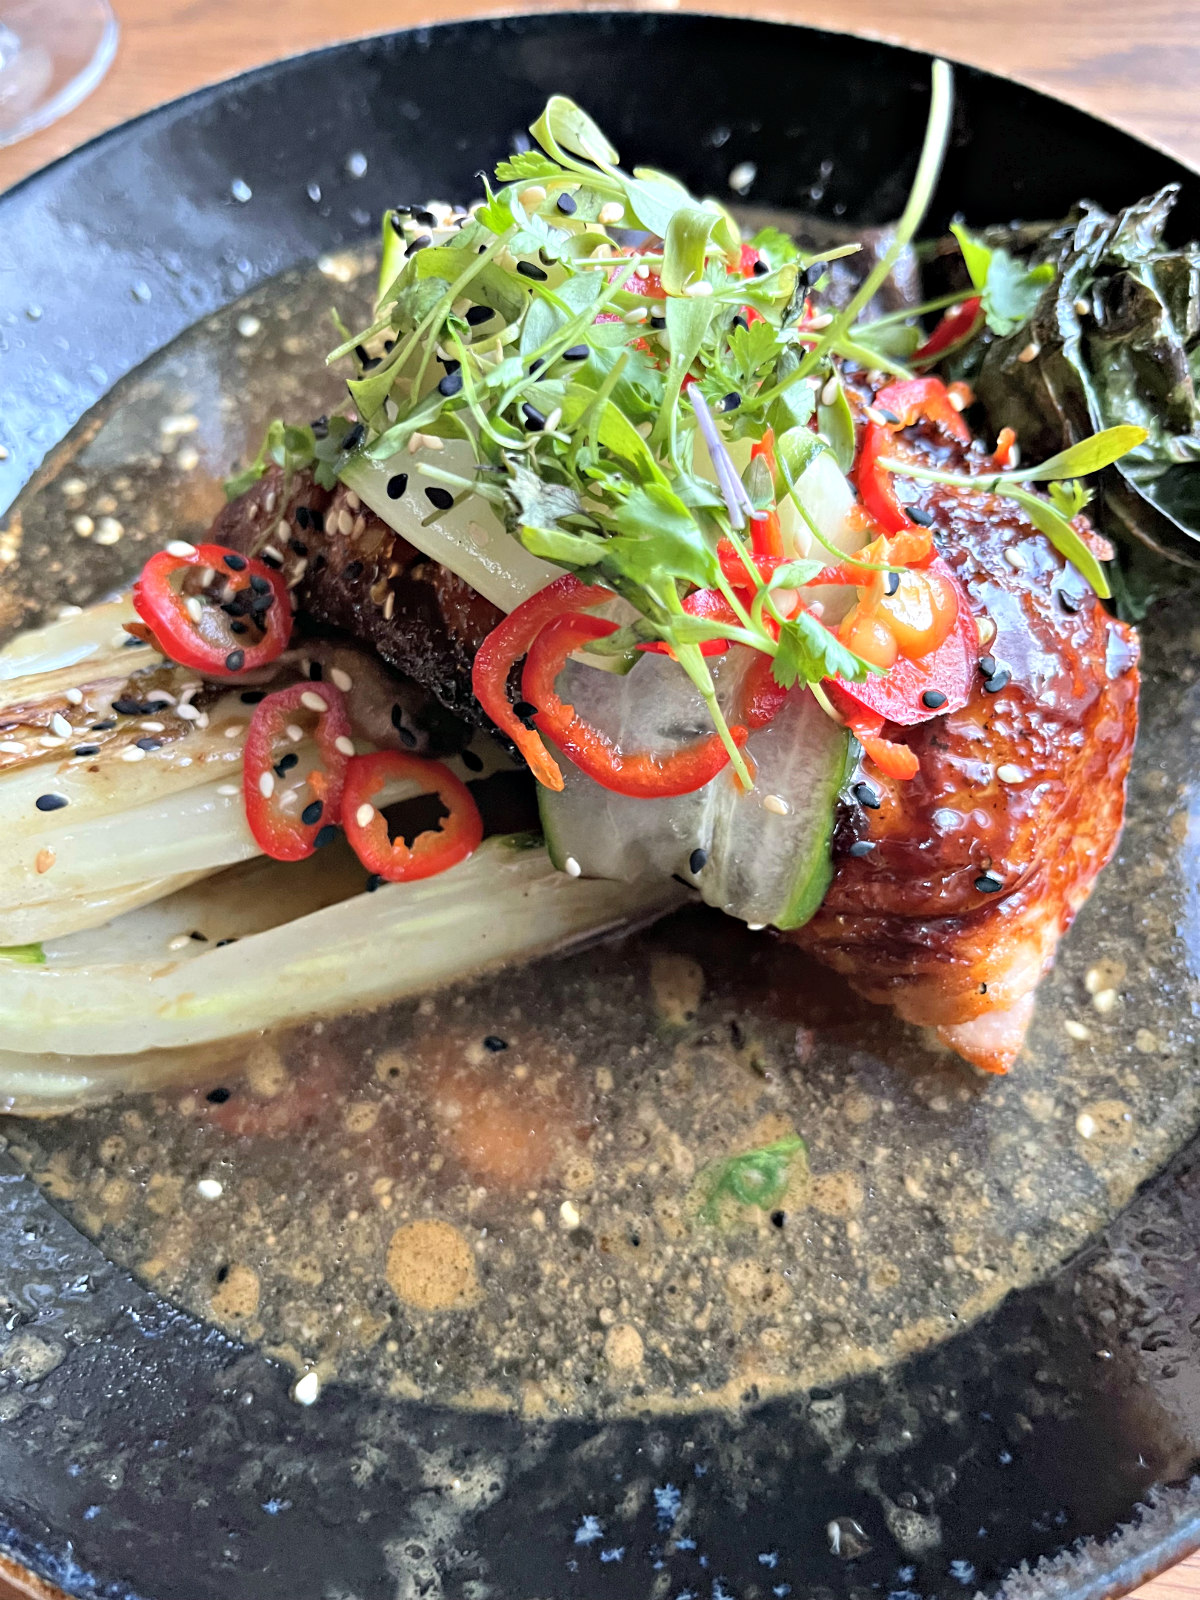 Review: At Dynamite, some dishes are on fire, while others lack spark